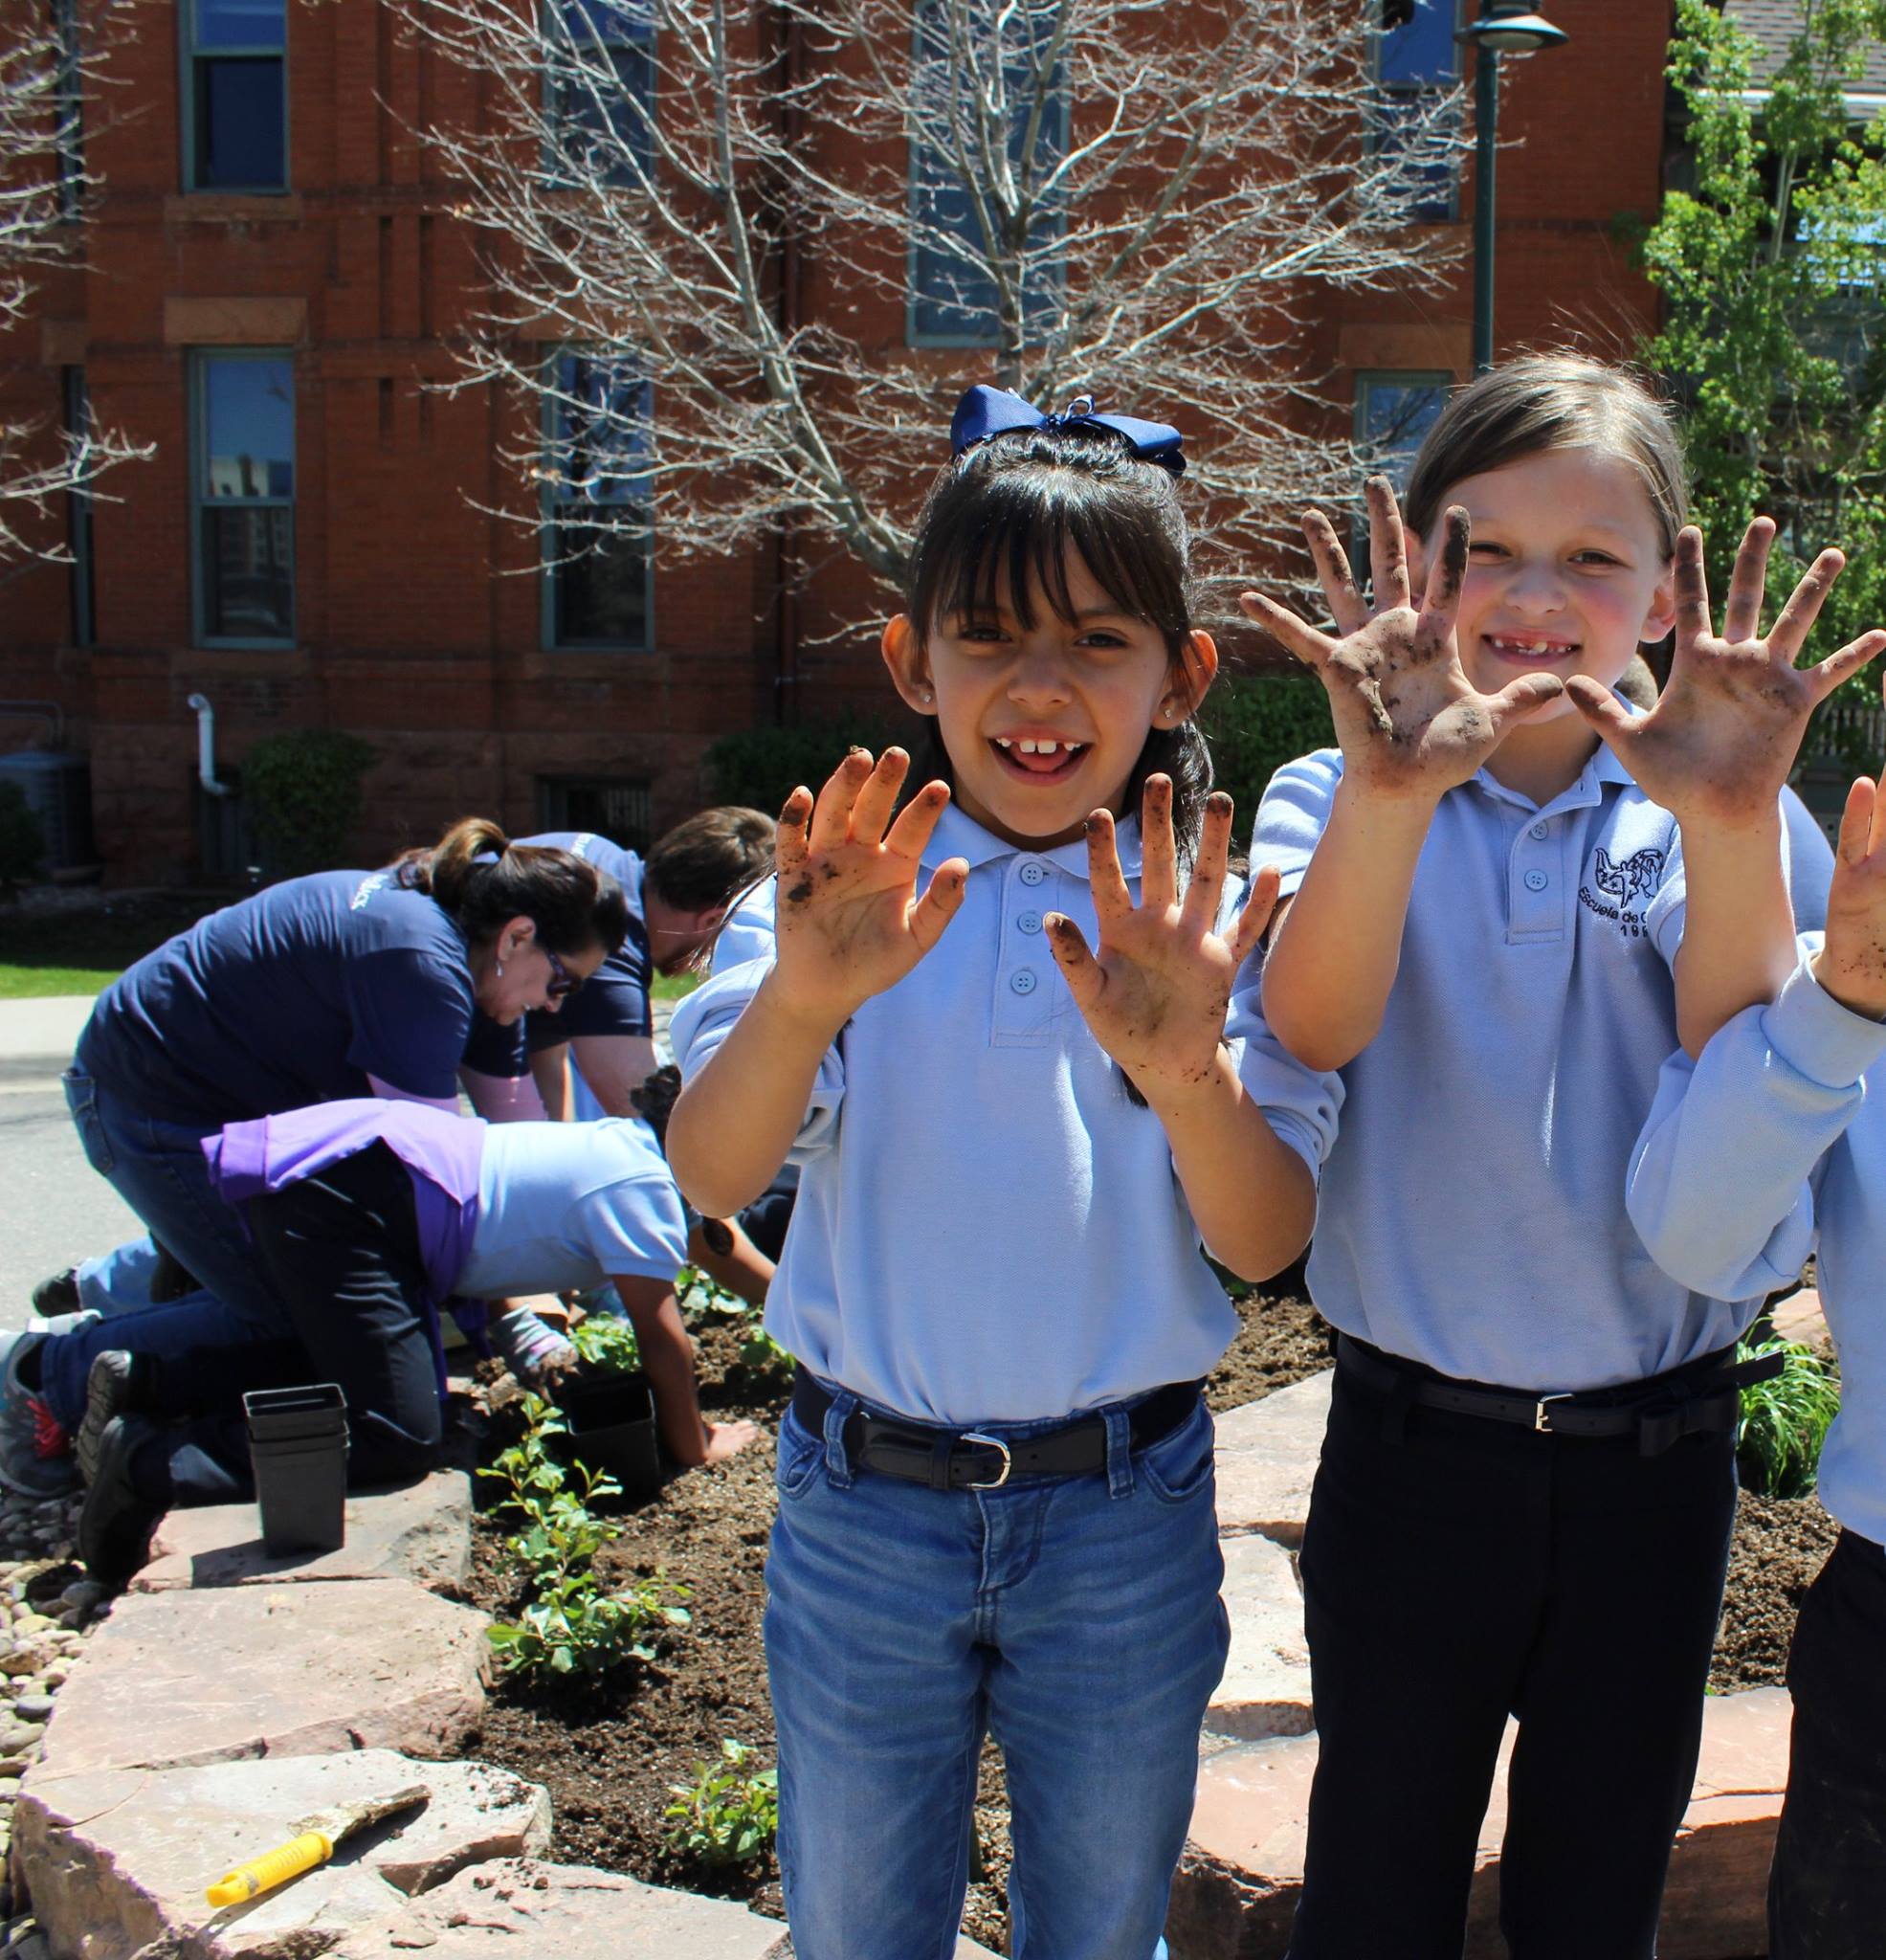 Escuela de Guadalupe students show off their dirty hands after learning to plant xeric (low water) plants with Atlas Real Estate Group team members.